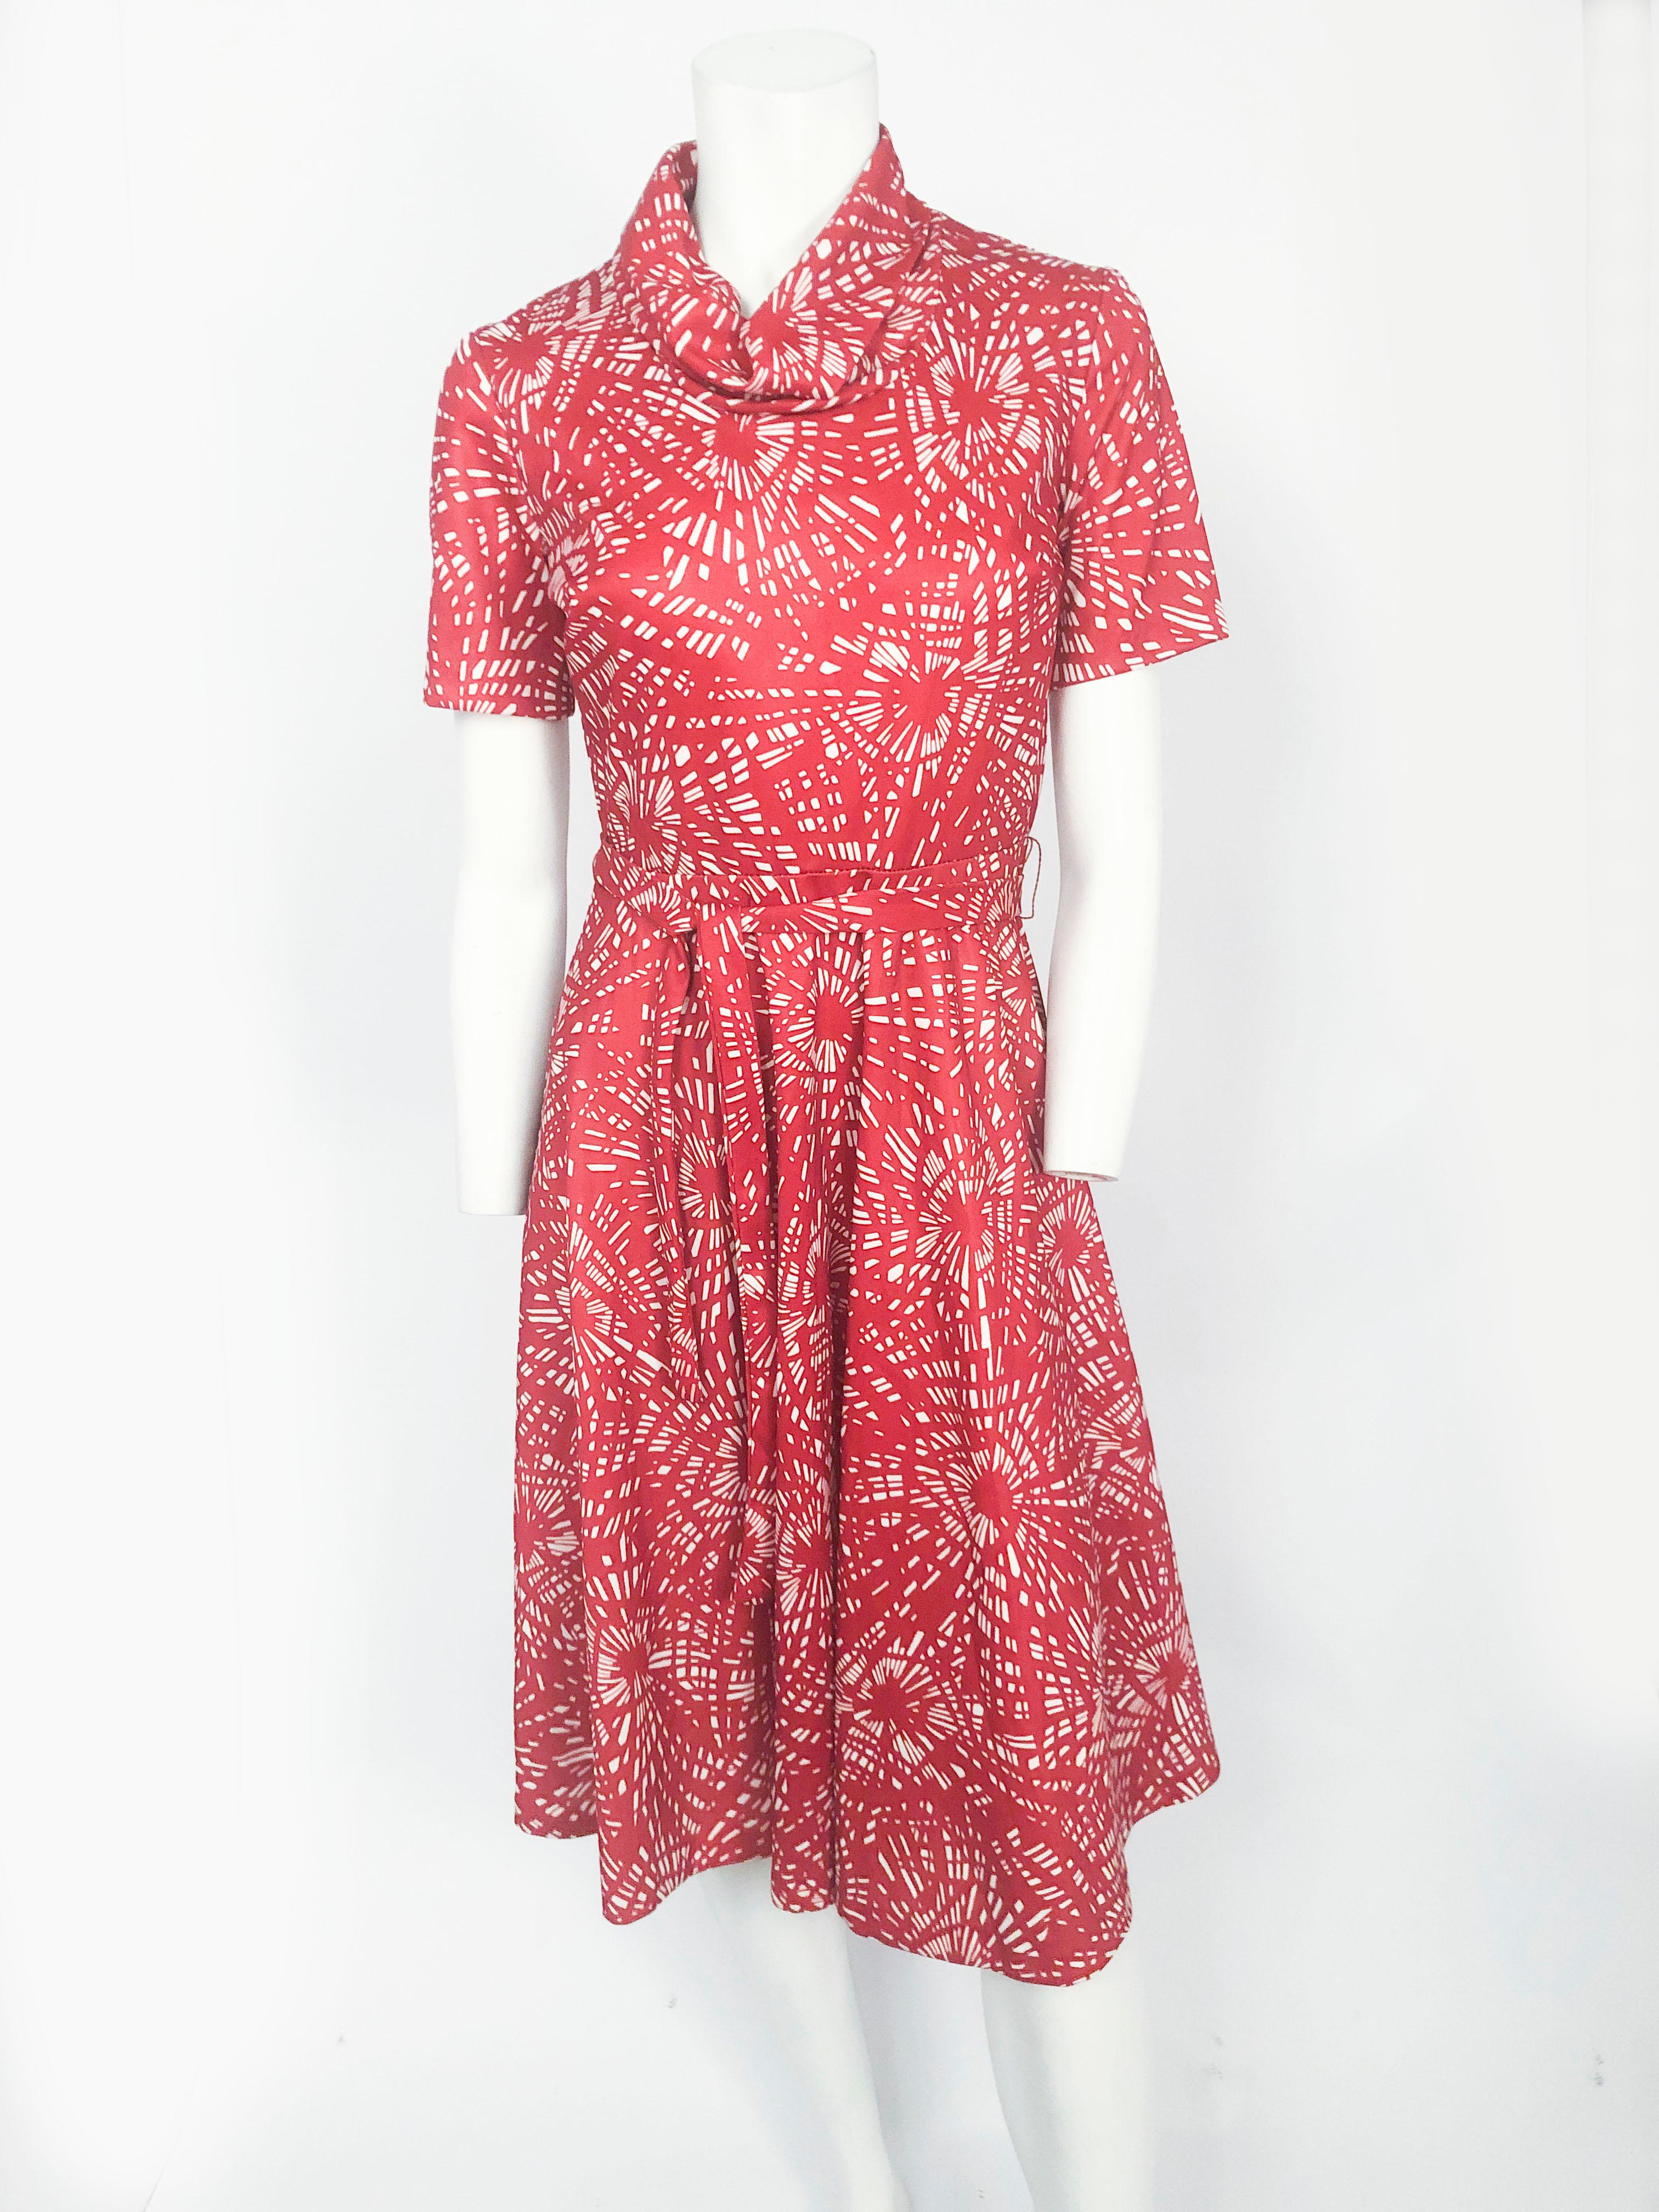 Blood Orange and white printed dress with fragmented print, short sleeves, midi length, matching sash and featuring an oversized draped turtleneck